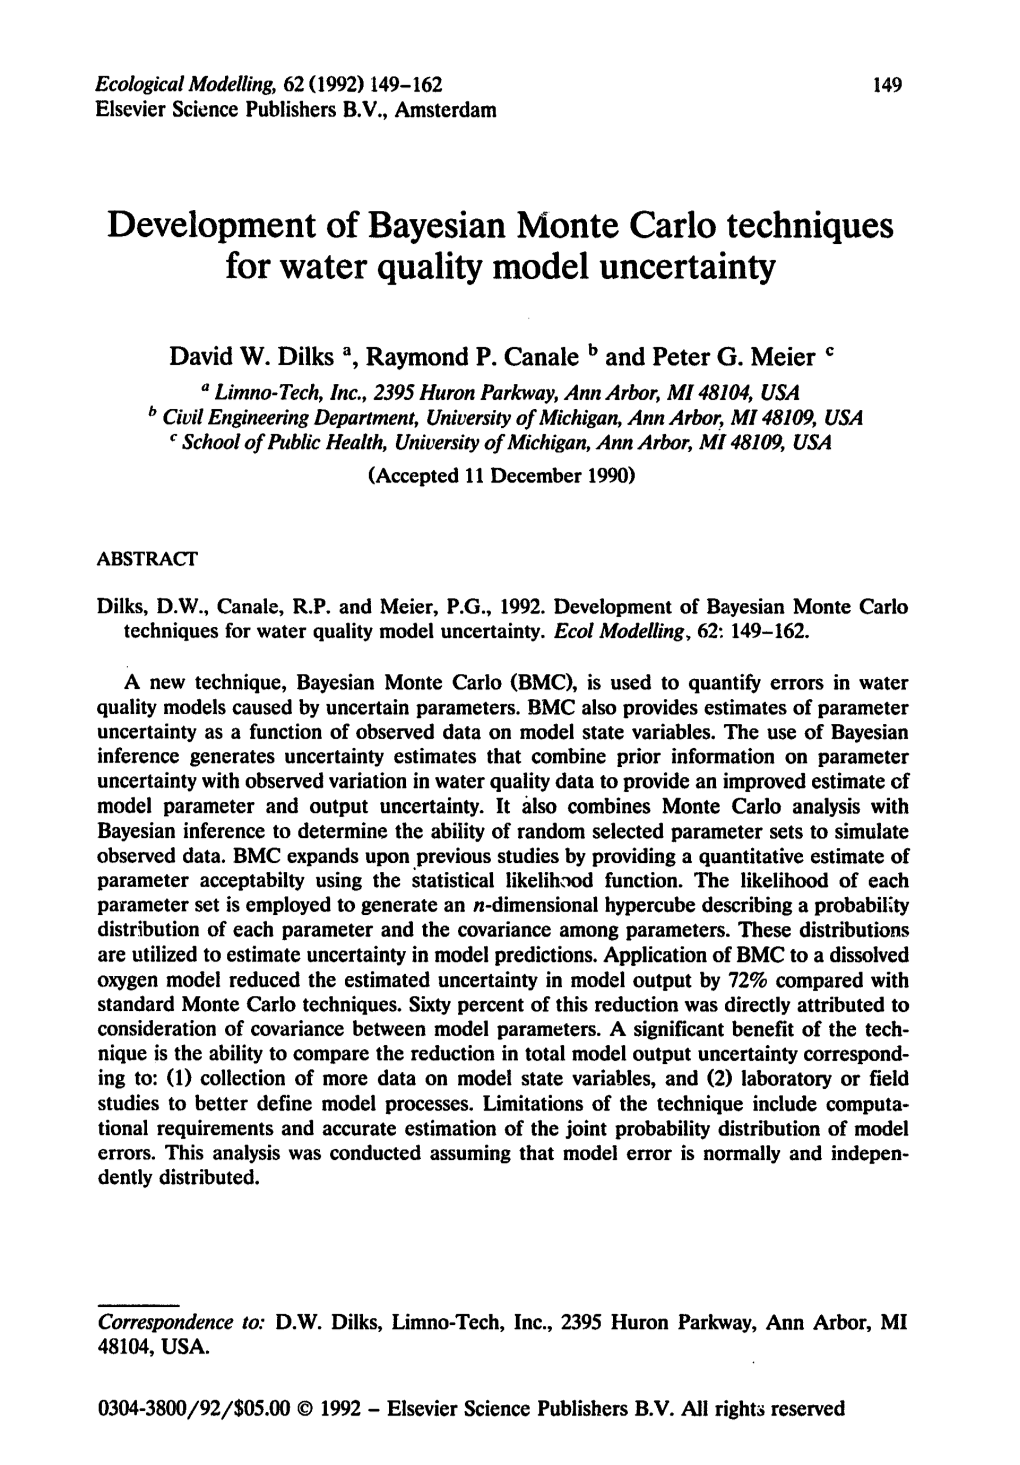 Development of Bayesian Monte Carlo Techniques for Water Quality Model Uncertainty